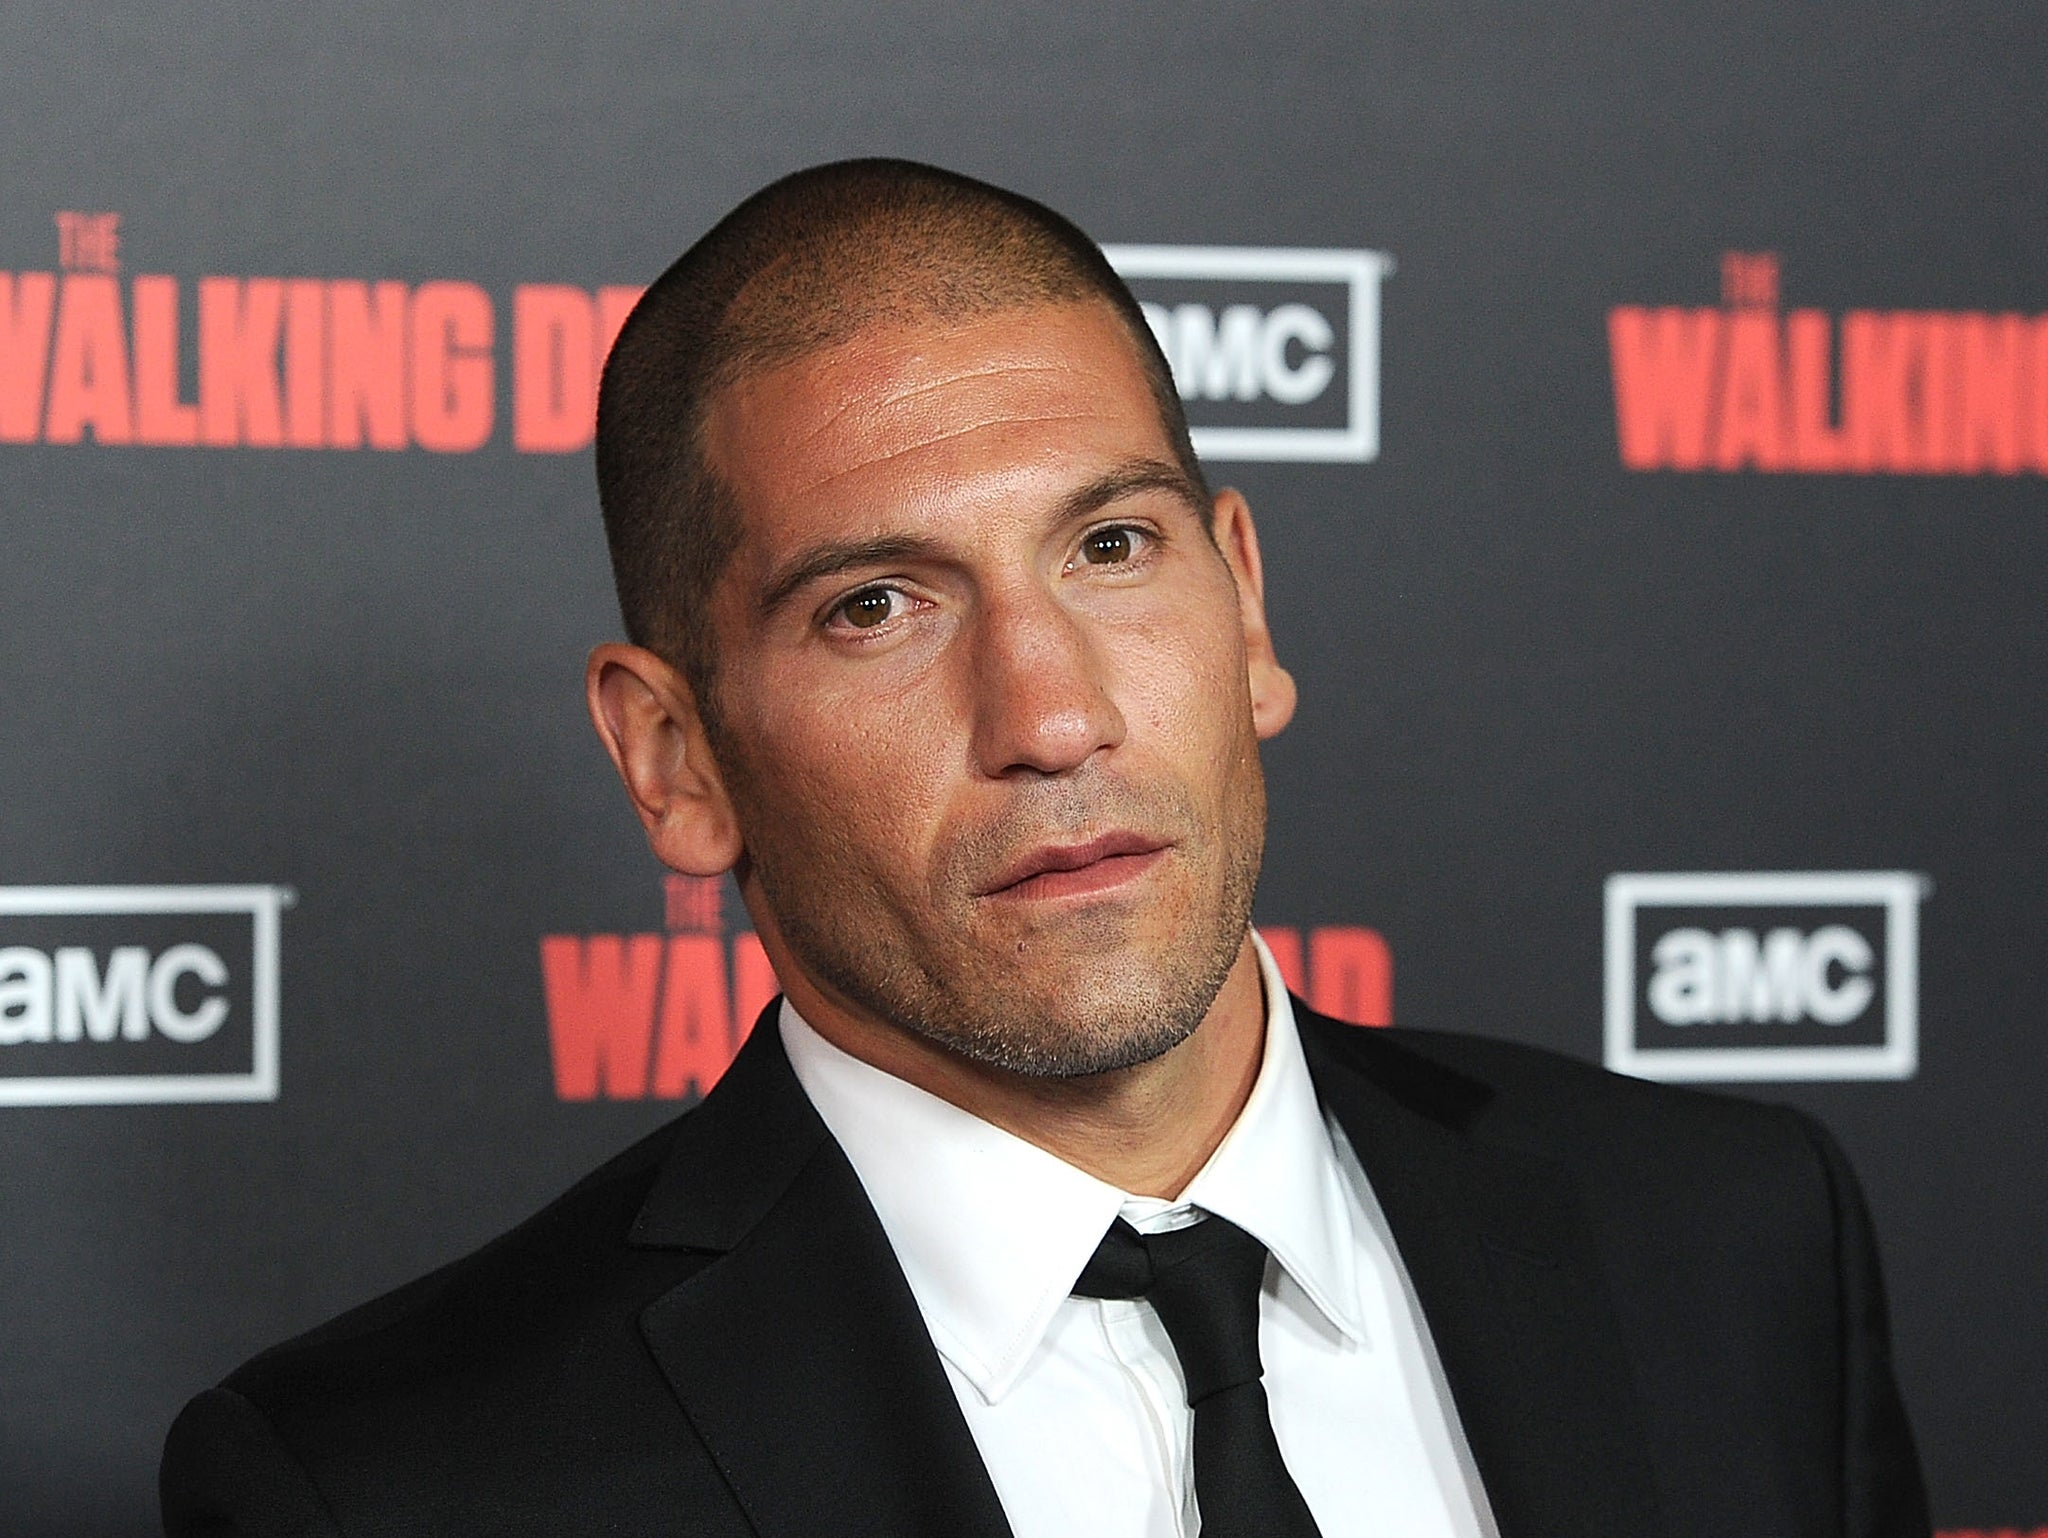 Jon Bernthal is set to play The Punisher in Marvel's Daredevil